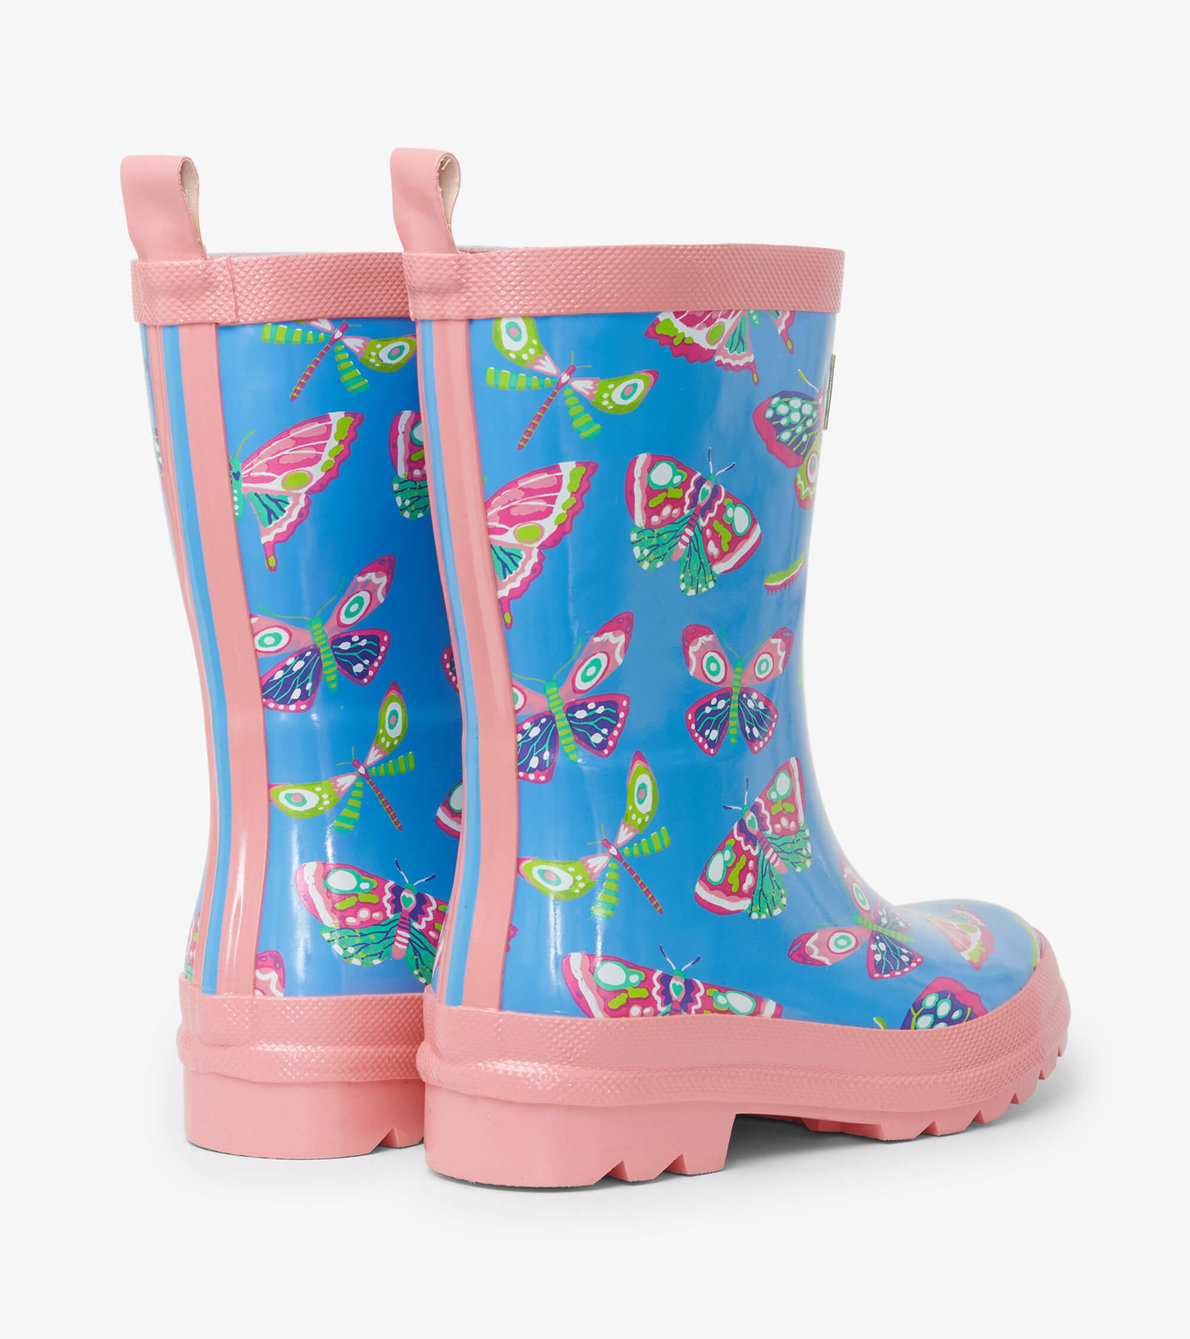 View larger image of Botanical Butterflies Shiny Rain Boots